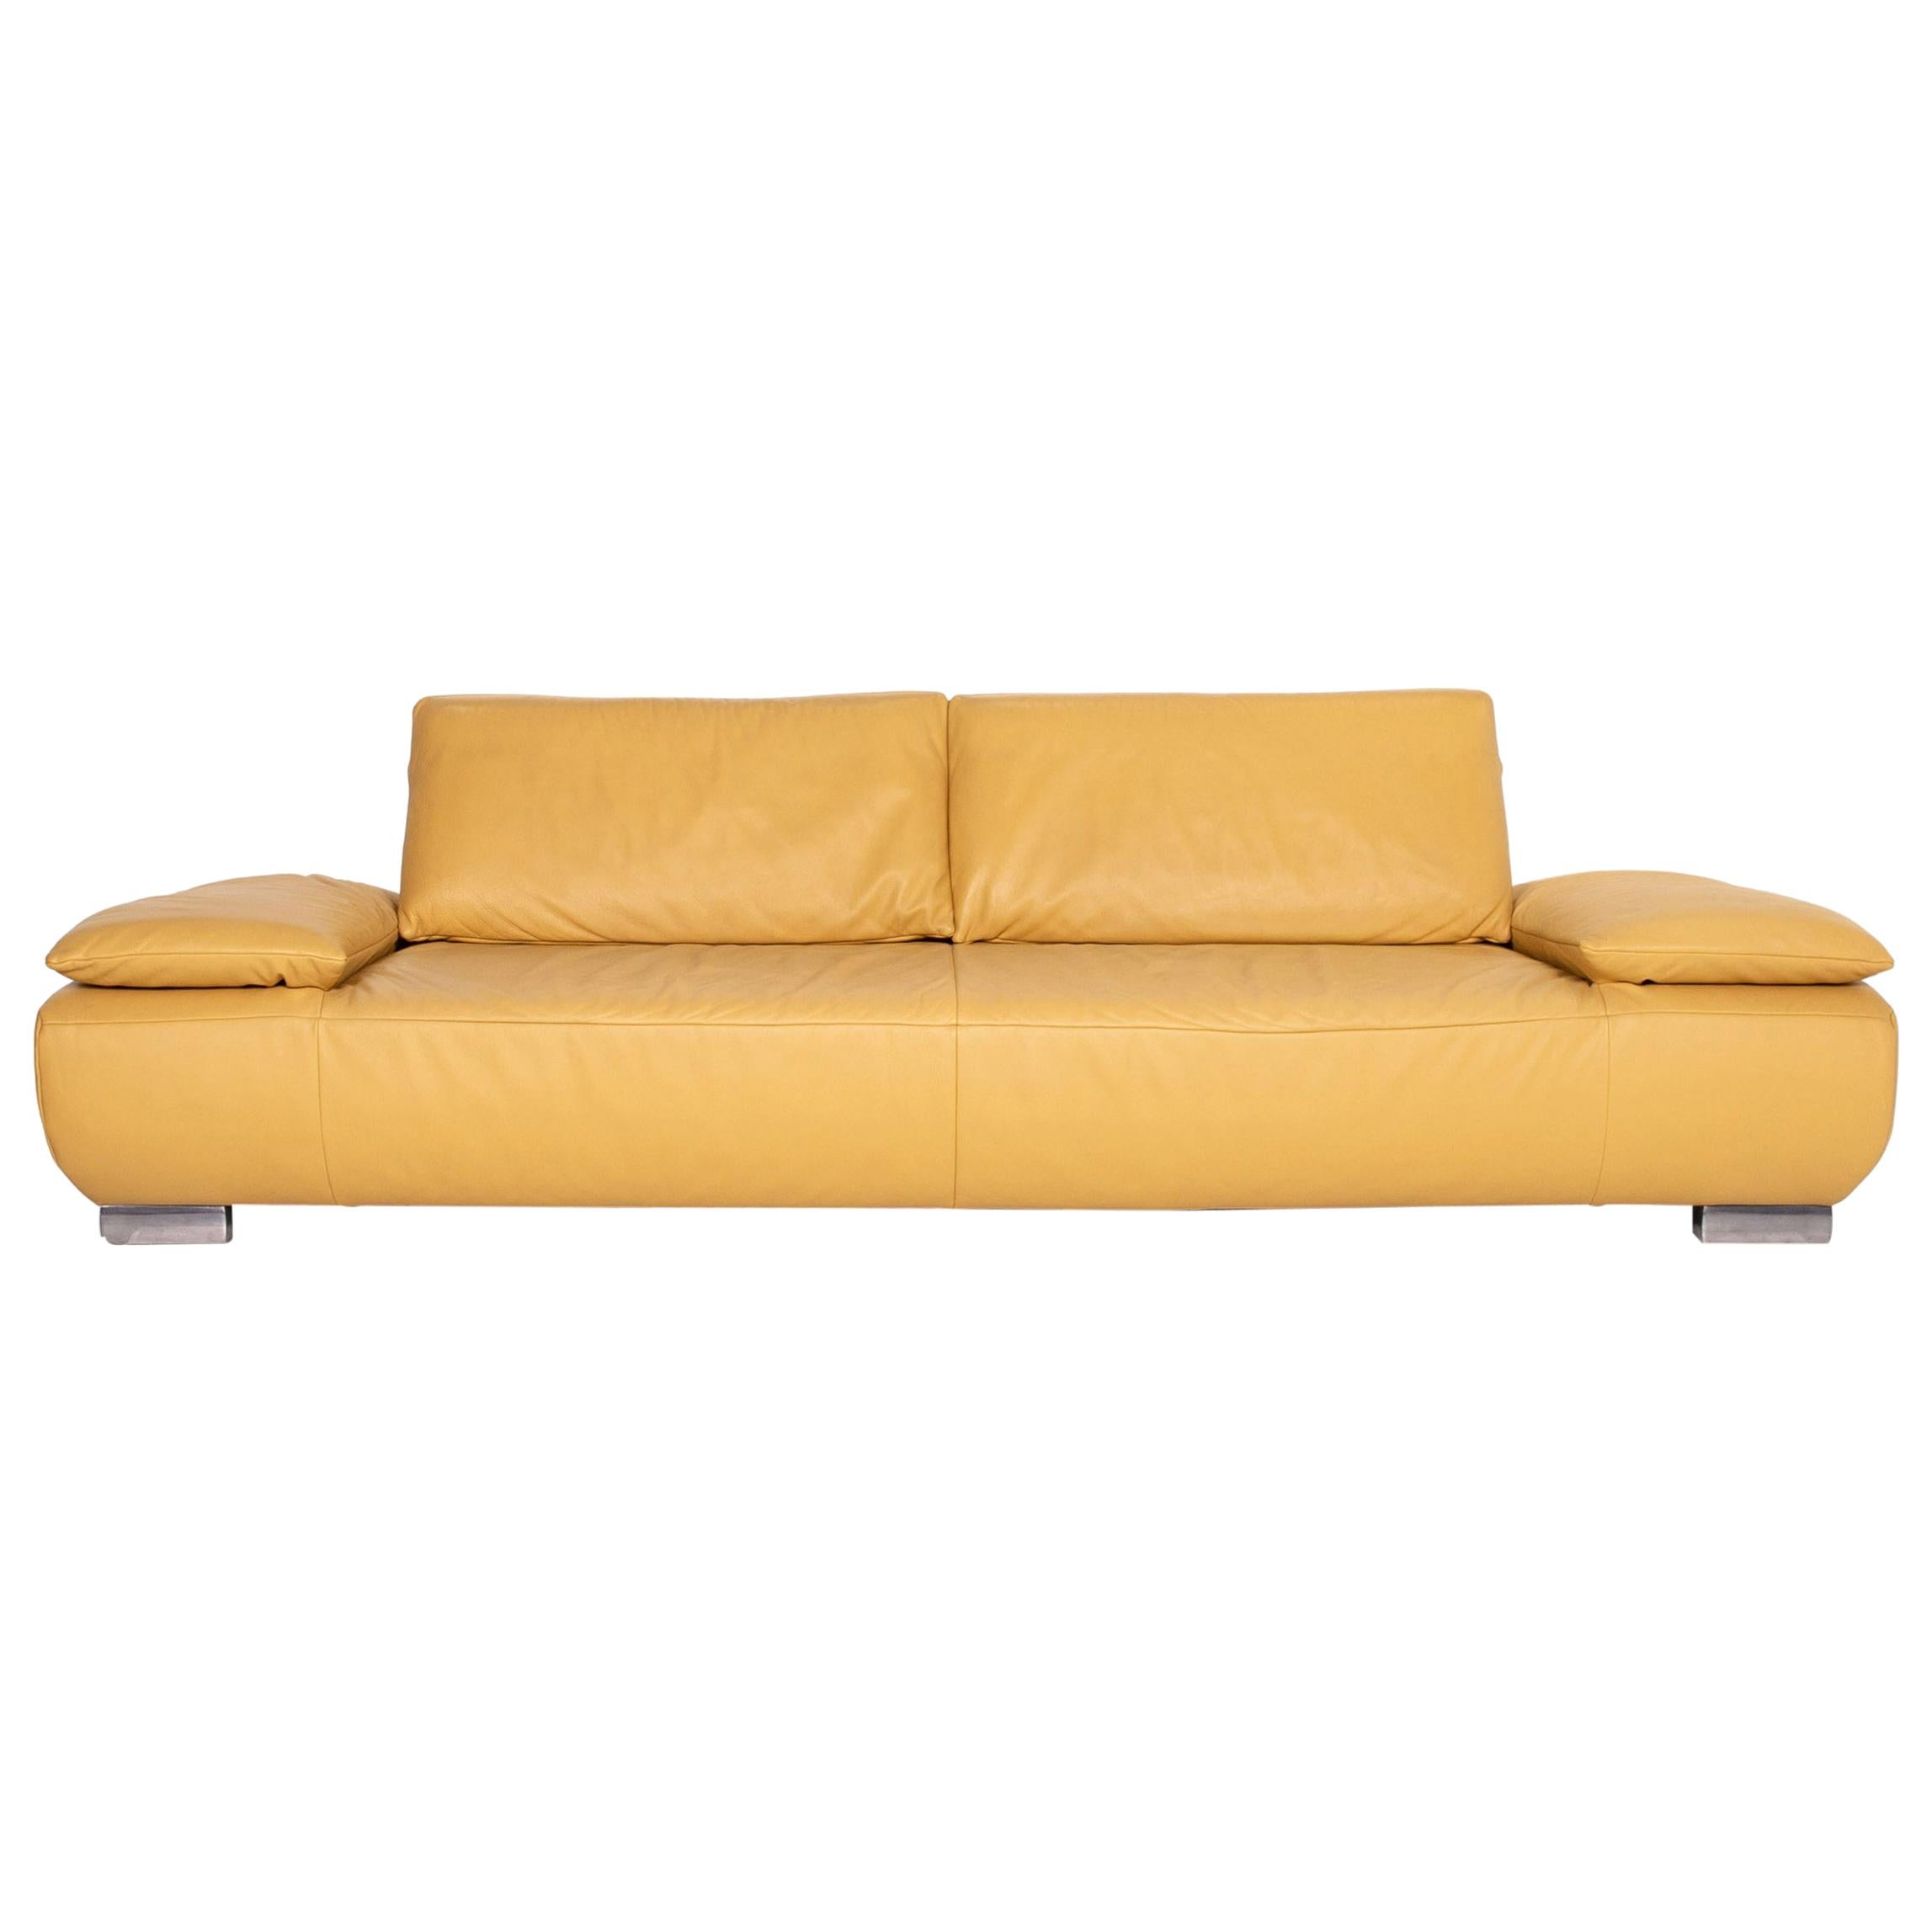 Koinor Volare Leather Sofa Yellow Three-Seat Function Couch For Sale